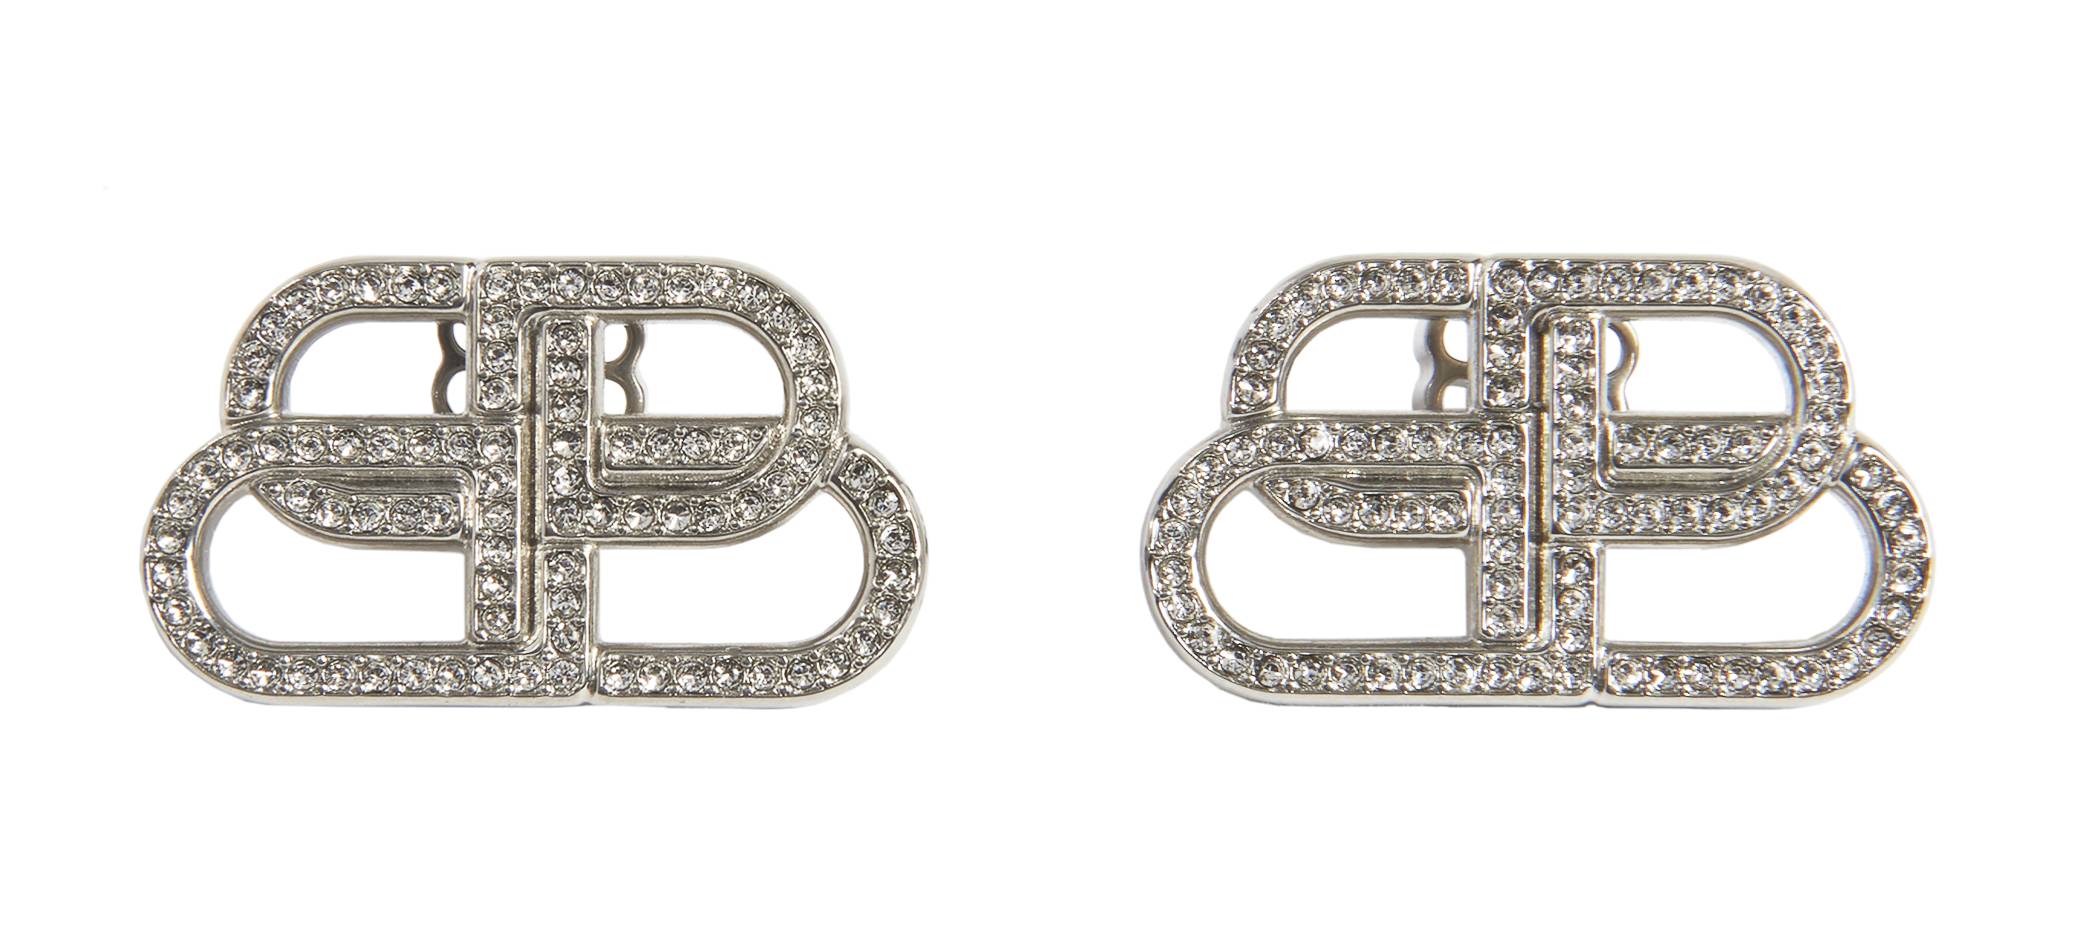 Balenciaga BB earrings from Orchard Mile